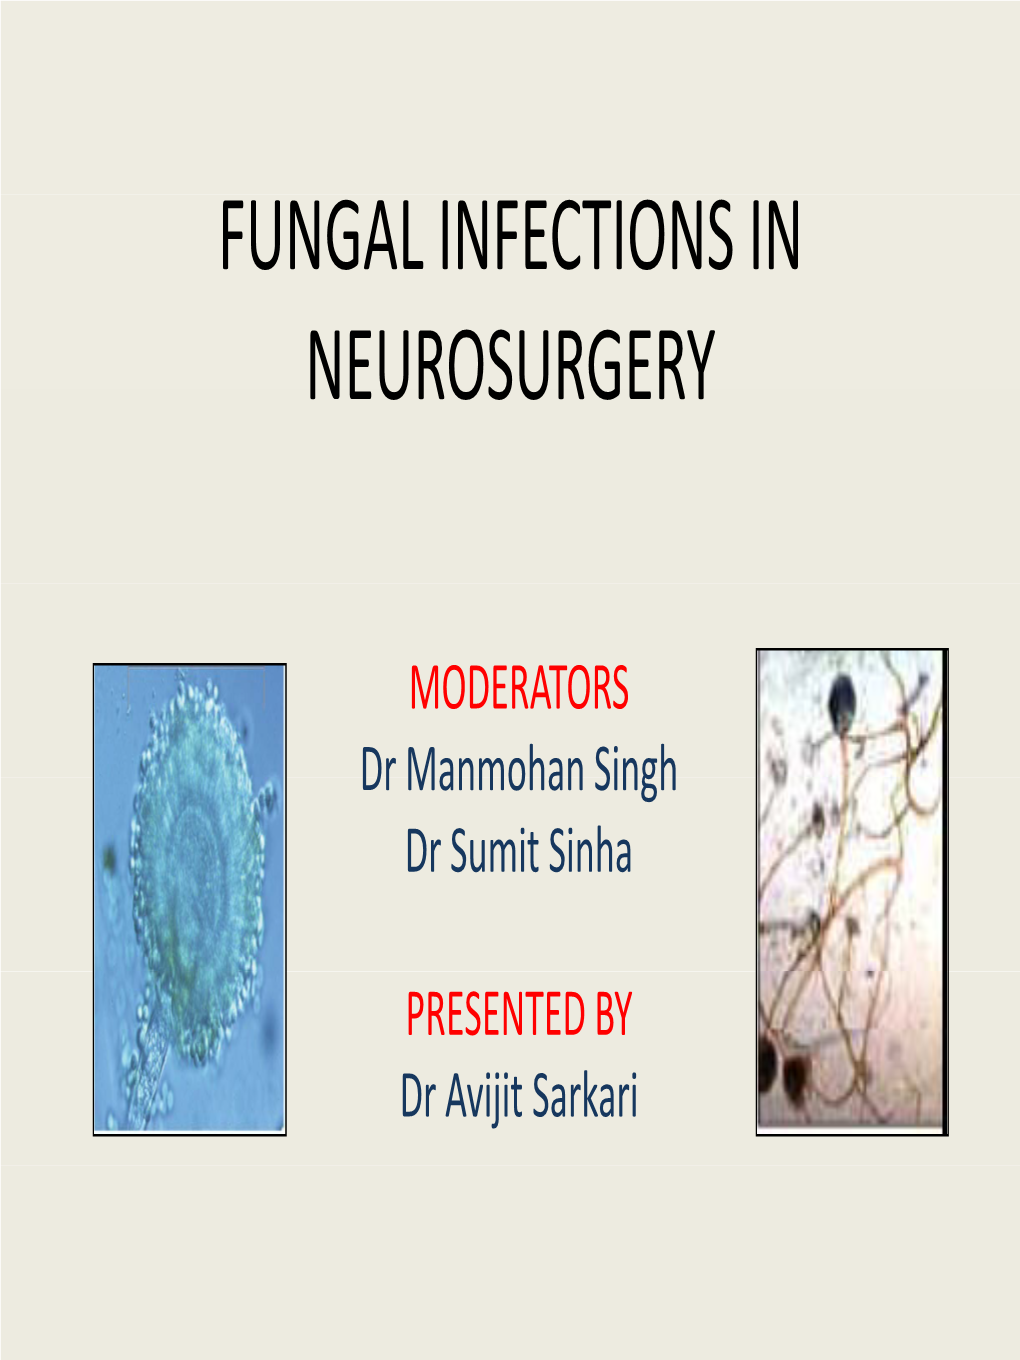 Fungal Infections in Neurosurgery